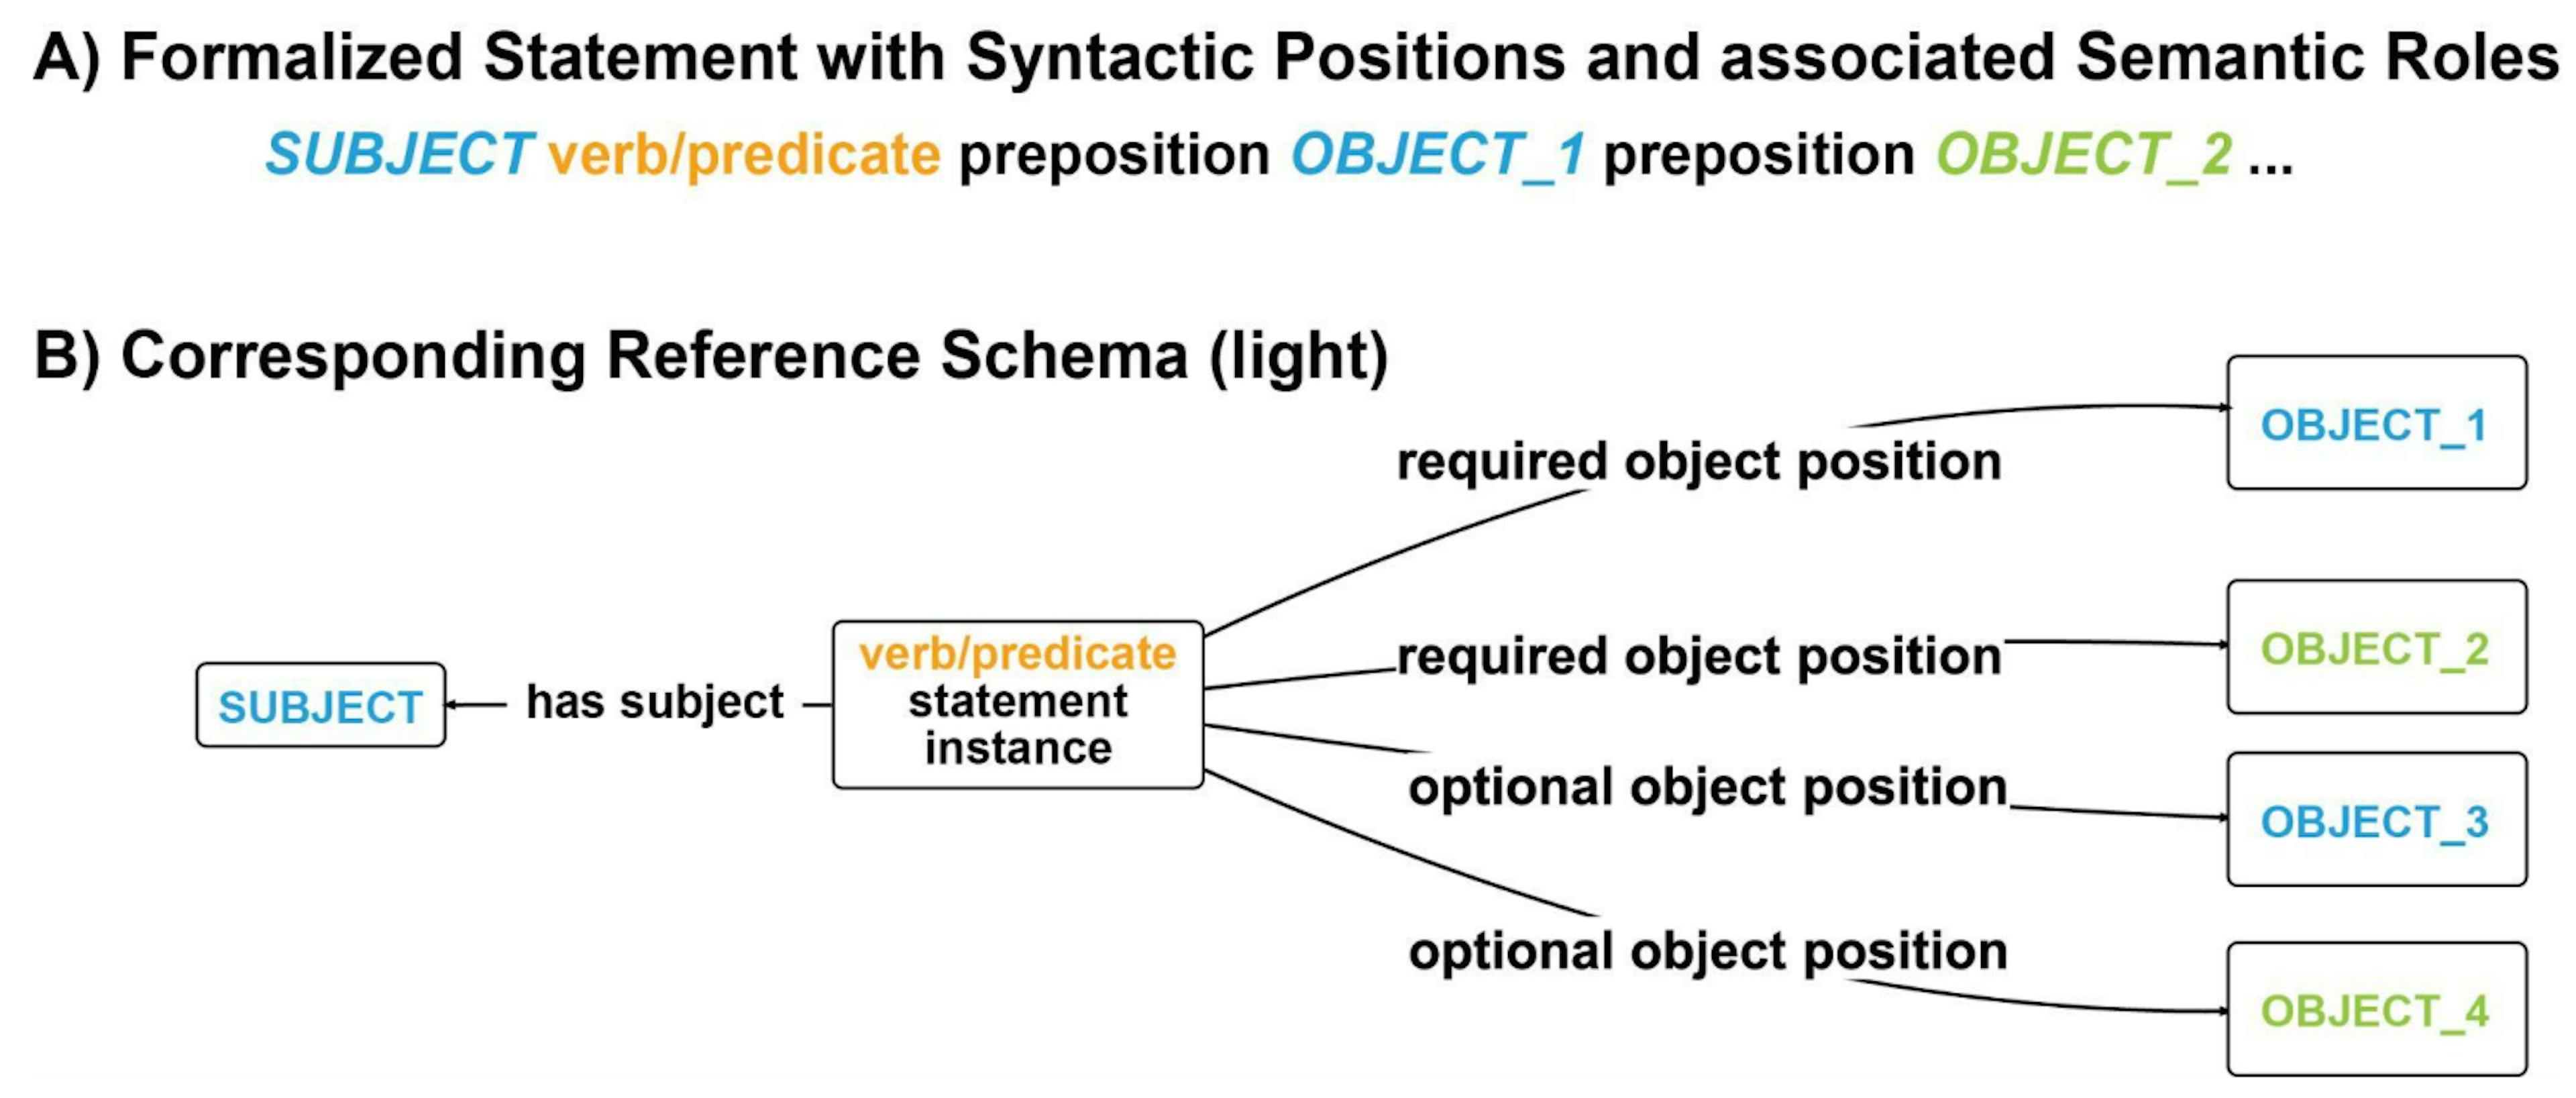 Figure 6: From a formalized natural language statement to the corresponding reference schema according to the lightversion of the Rosetta approach. A) A formalized statement with its syntactic positions and associated semantic roles